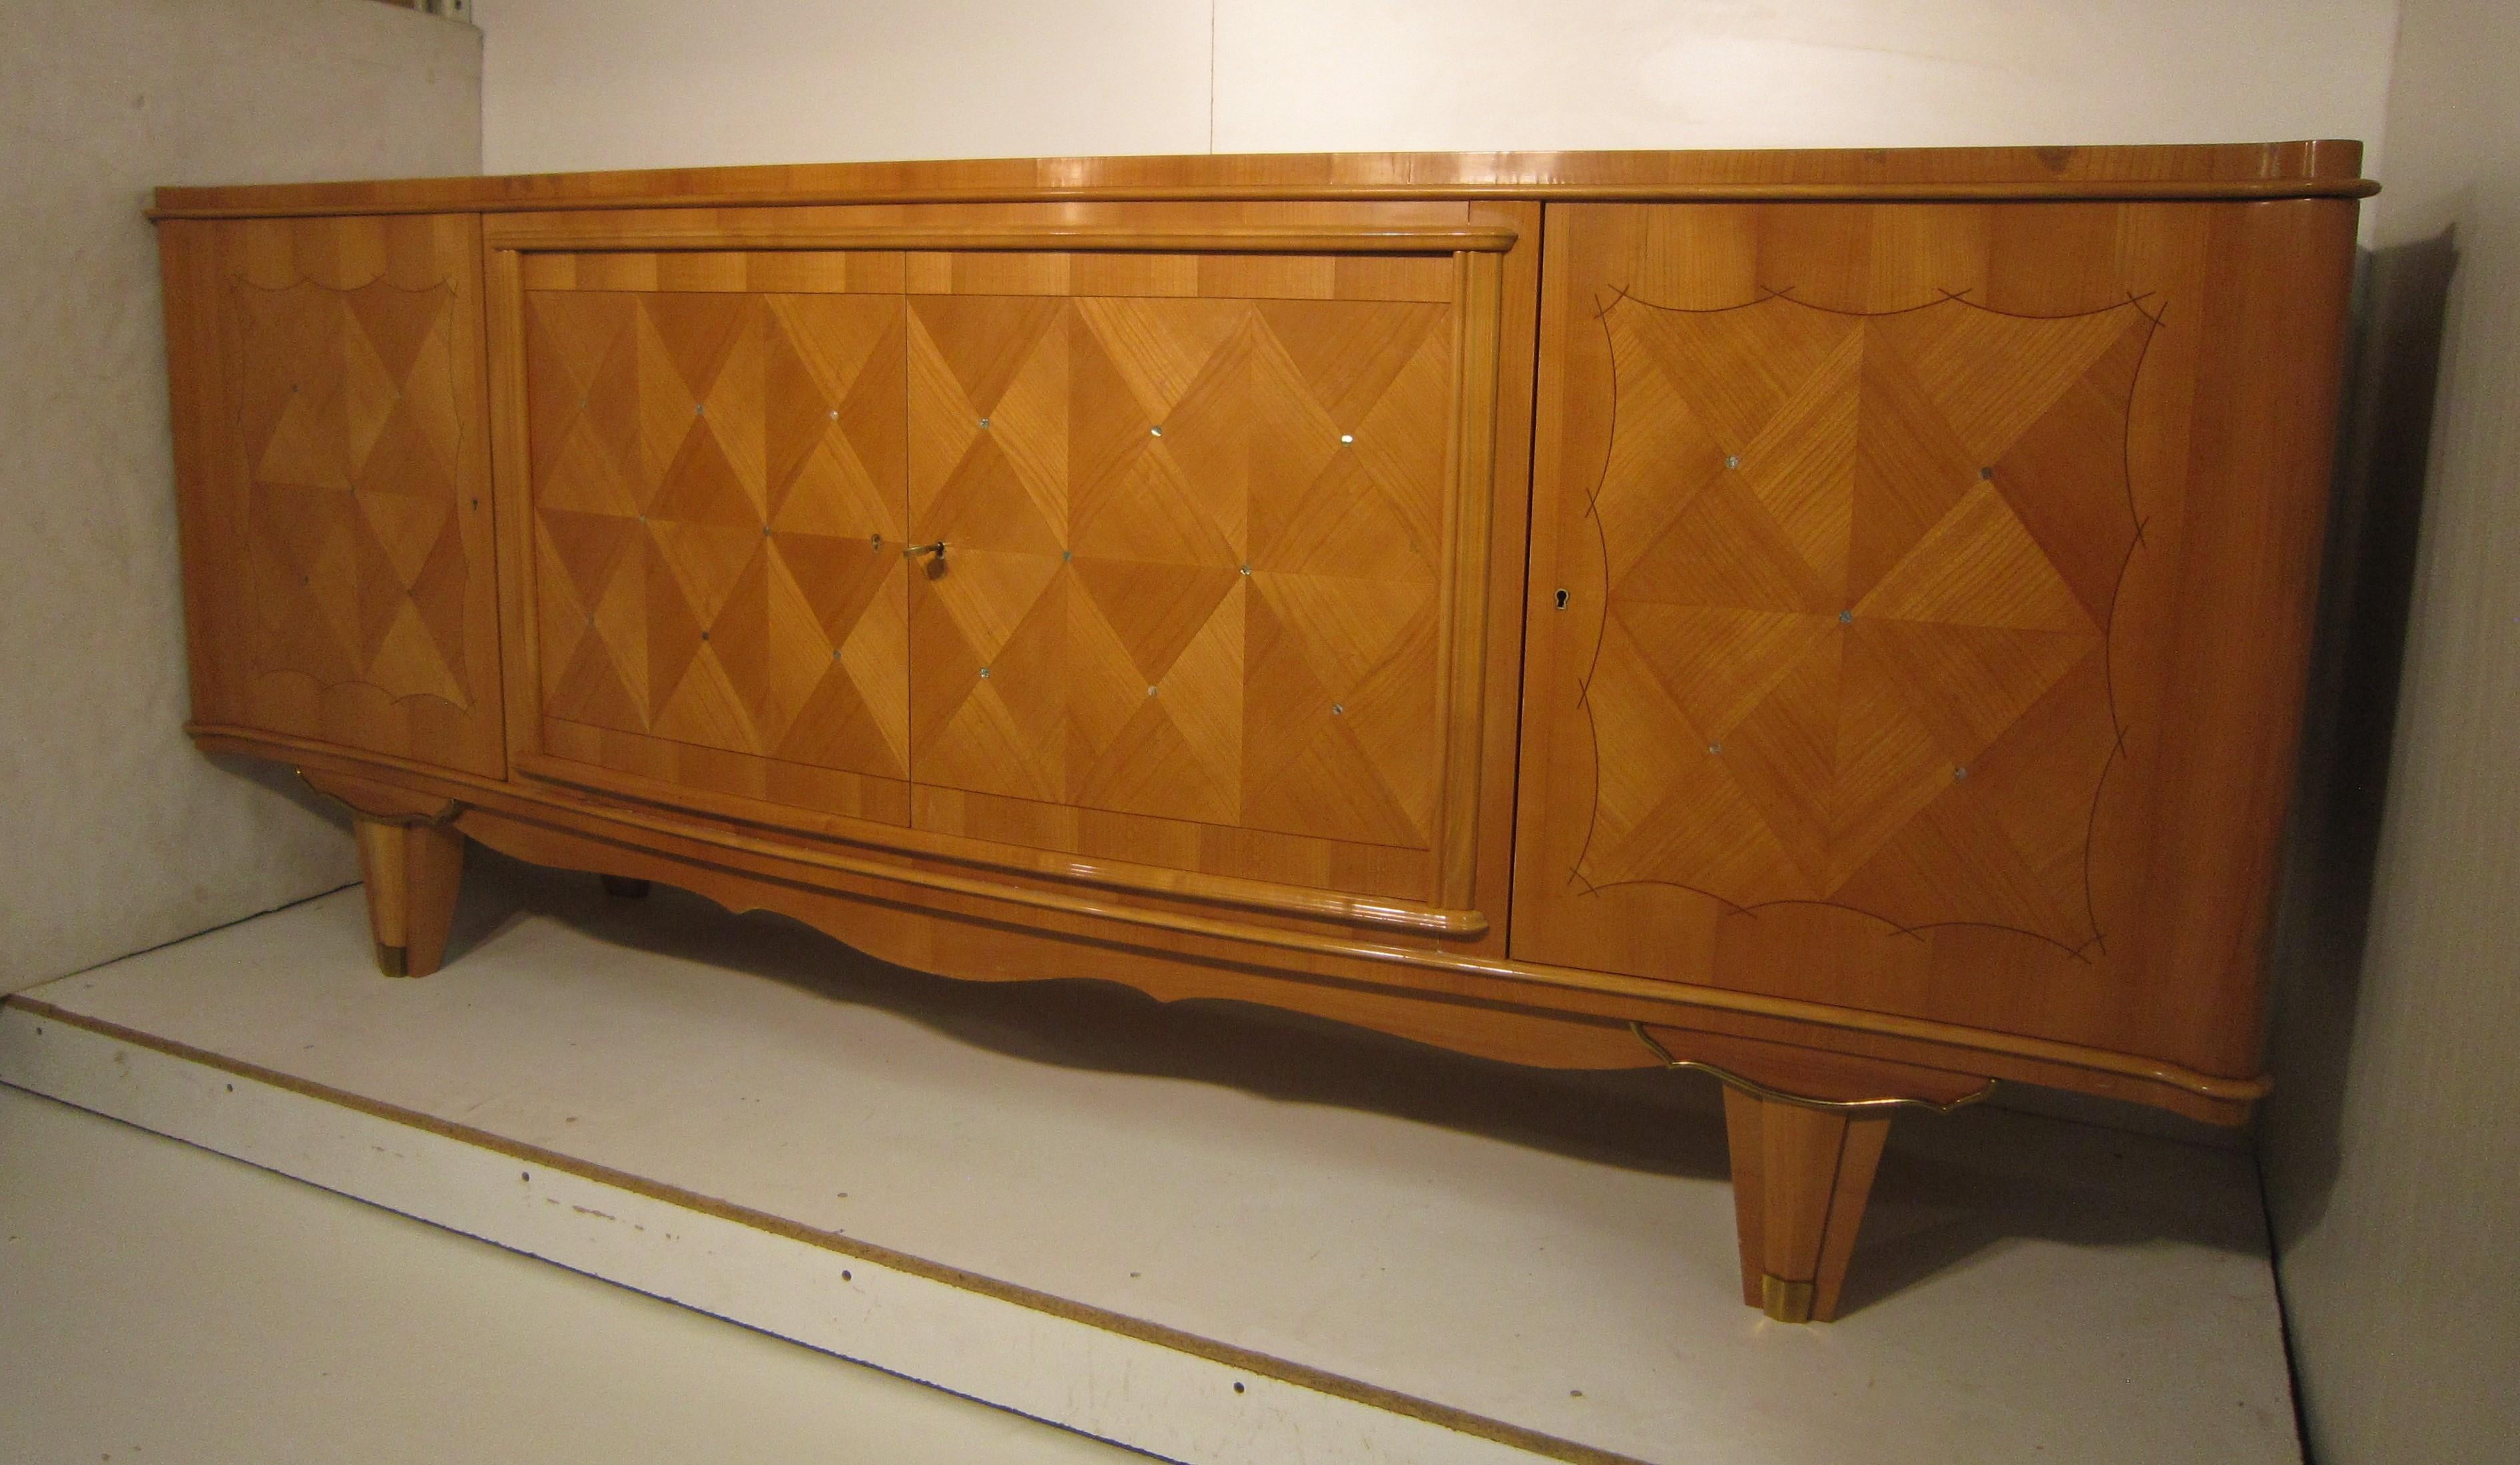 Elegant French midcentury sycamore sideboard attributed to Andre Arbus, showcasing four exquisite geometric patterned parquetry and marquetry blonde wood doors inlaid with mother of pearl dots.
The central doors feature a molded surround.
All